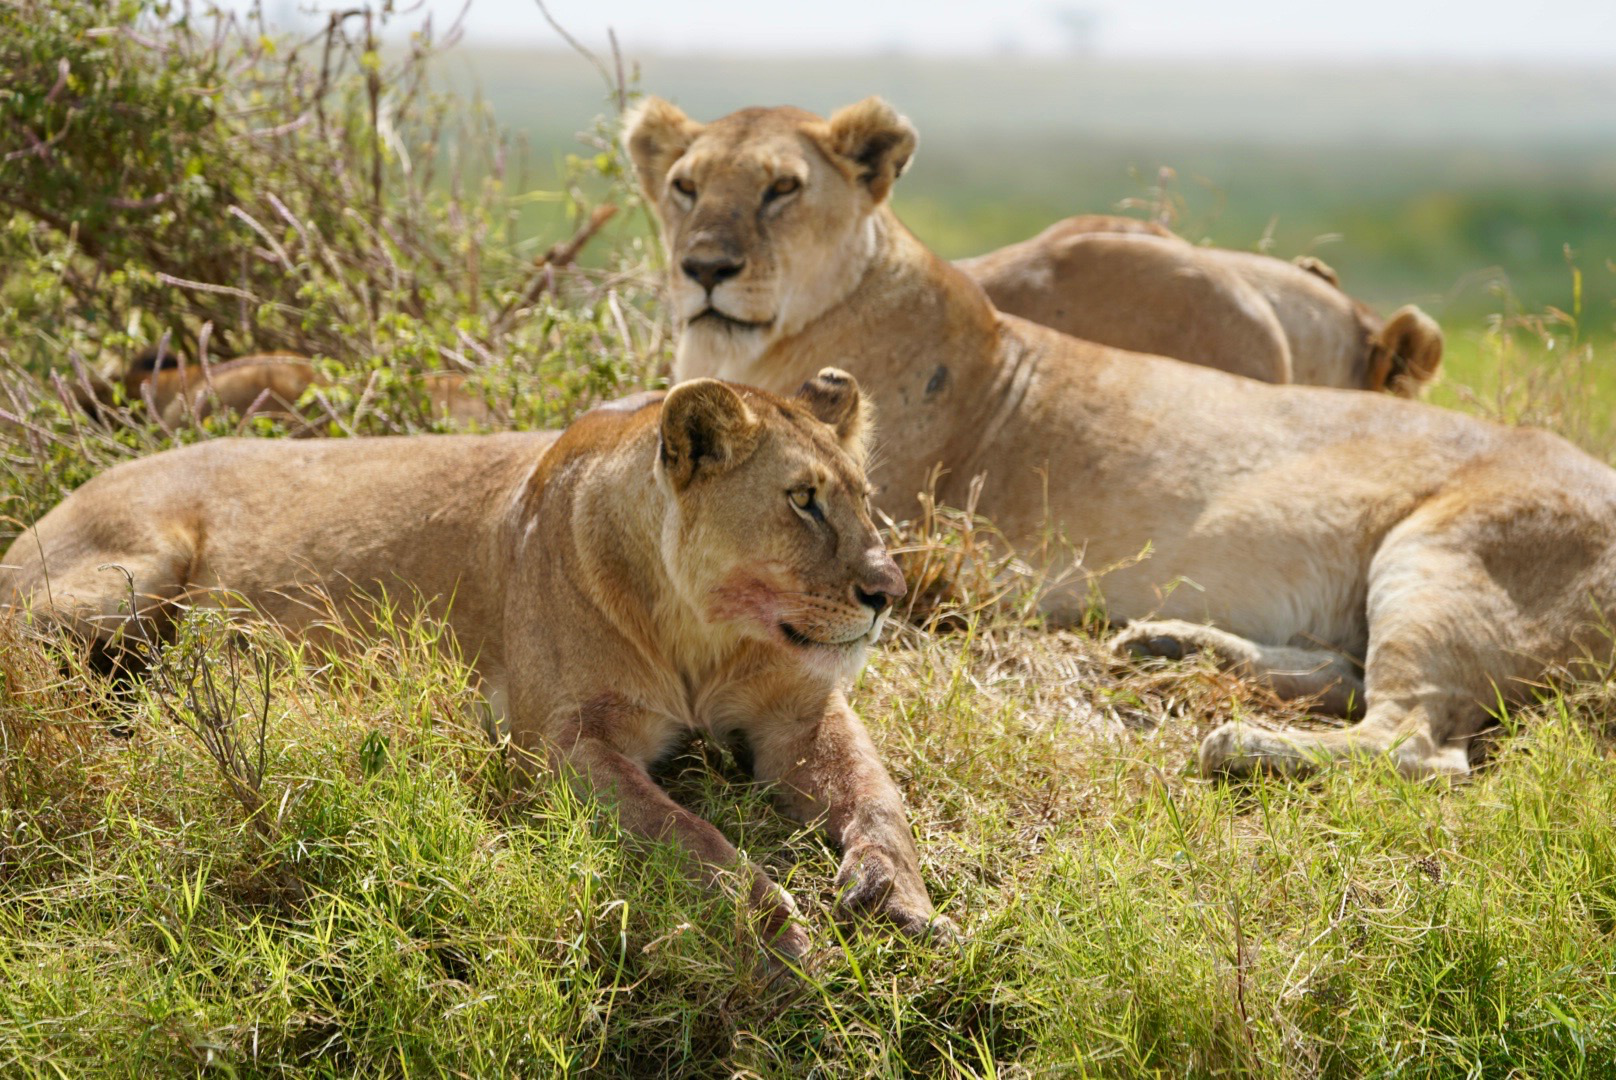 Three lionesses sit on a grassy hill together. The front ones' muzzle is still stained red from their last meal. She looks to the side, the one behind her looks toward the camera, and the last one just lays down.